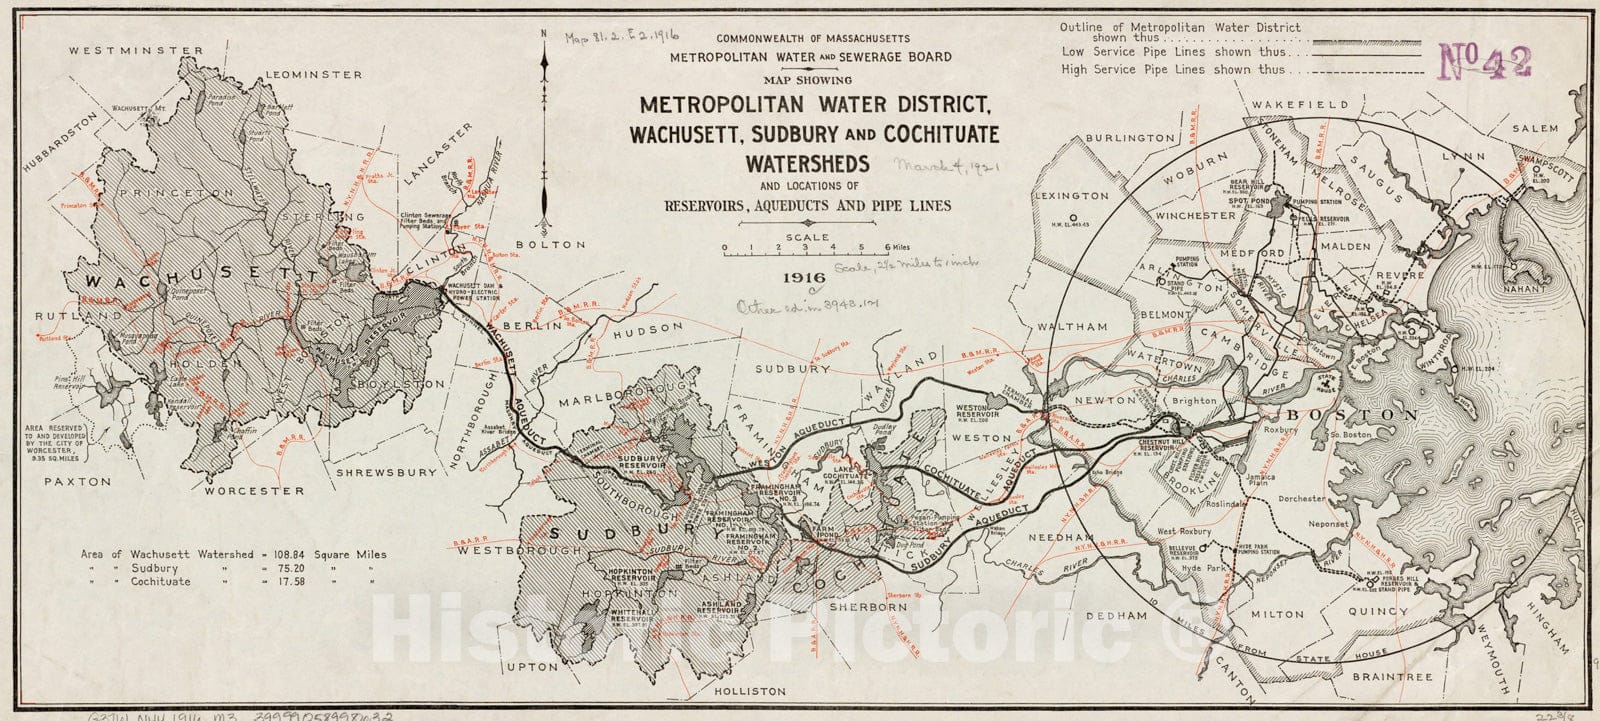 Historical Map, 1916 Map Showing Metropolitan Water District, Wachusett, Sudbury and Cochituate watersheds and Locations of reservoirs, aqueducts and Lead Pipes, Vintage Wall Art